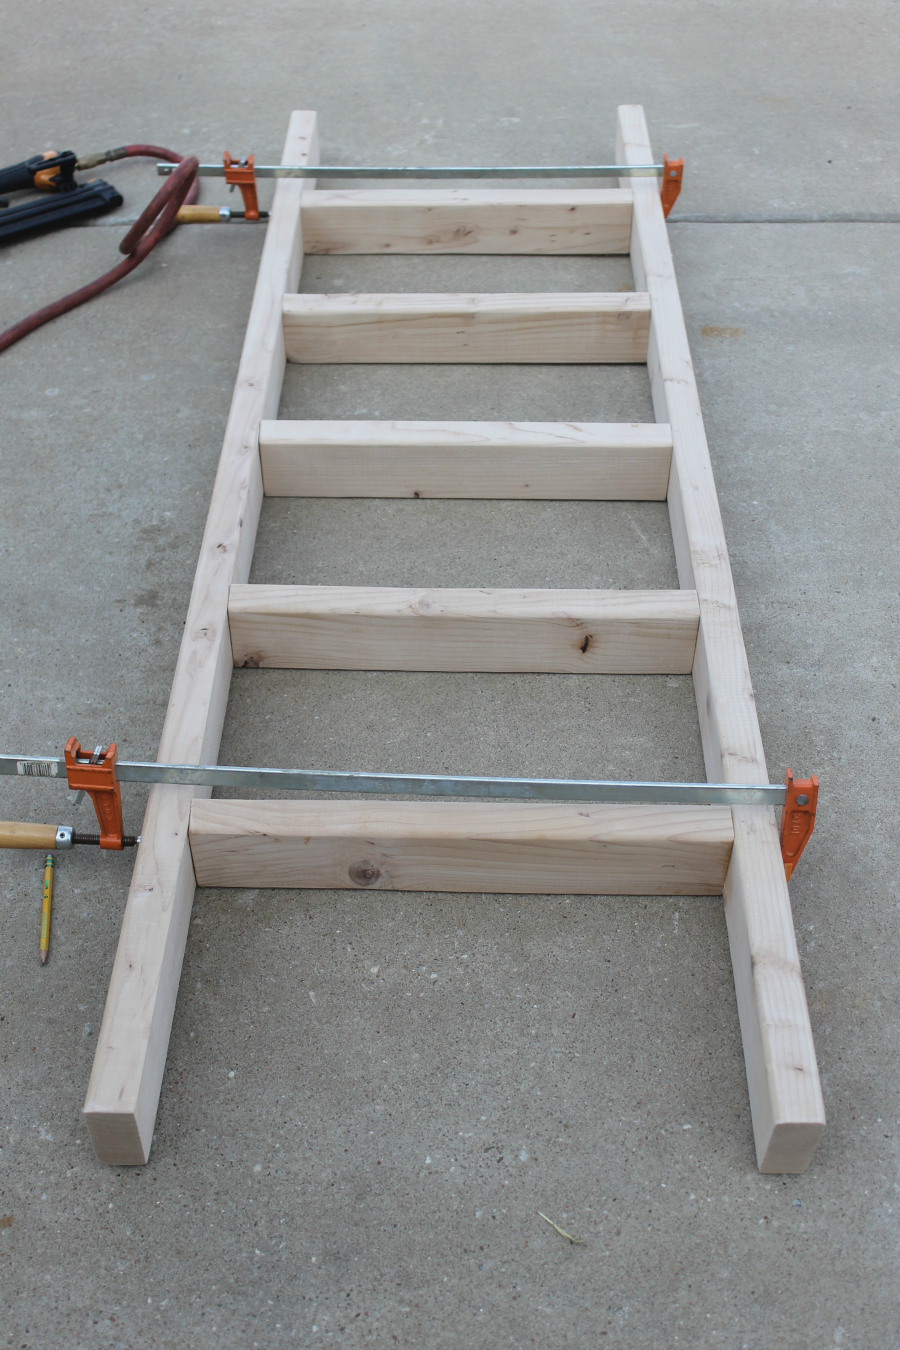 how to make a ladder - clamp and allow wood glue to dry